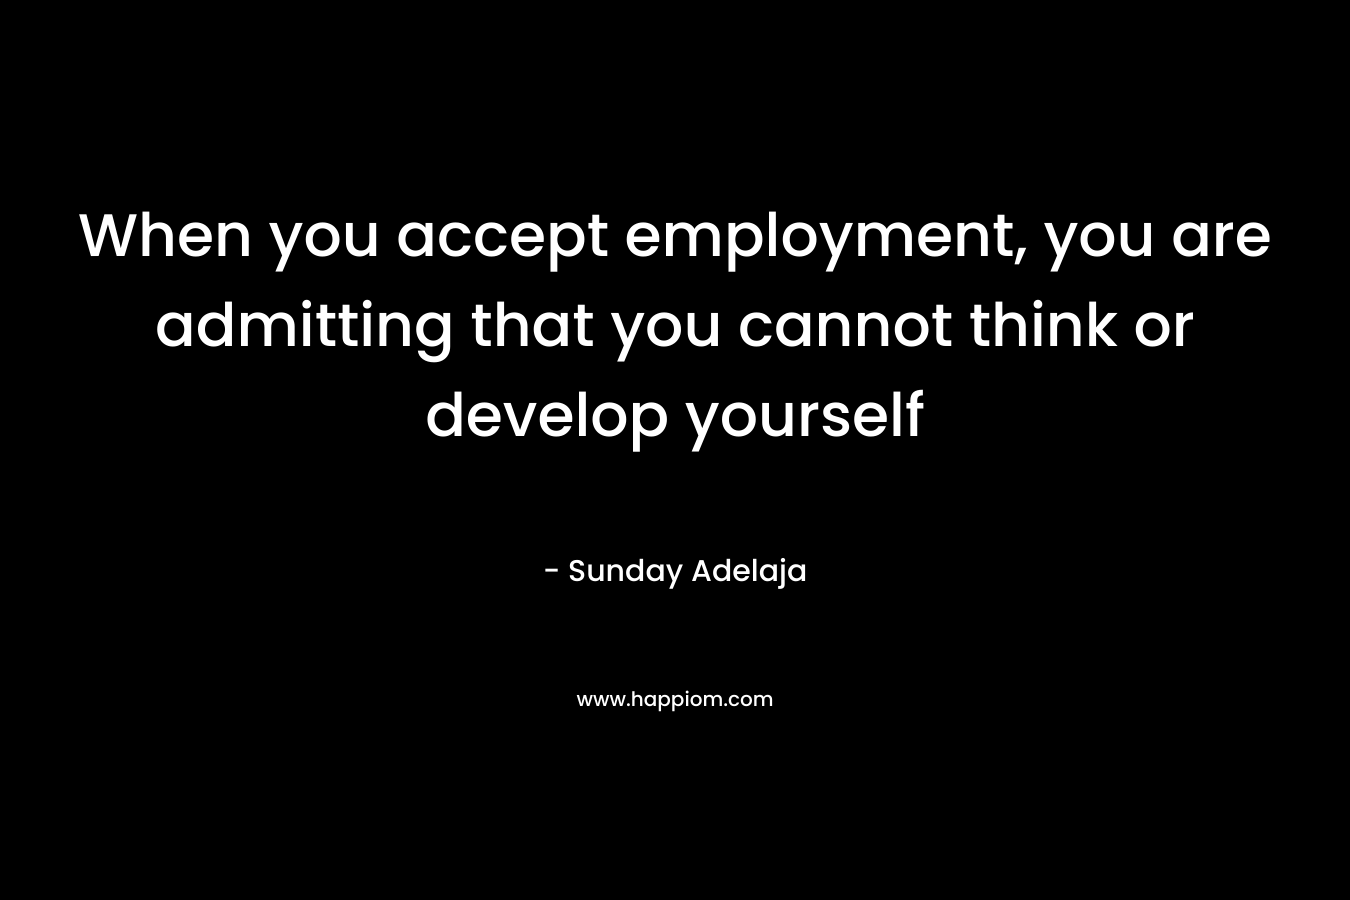 When you accept employment, you are admitting that you cannot think or develop yourself